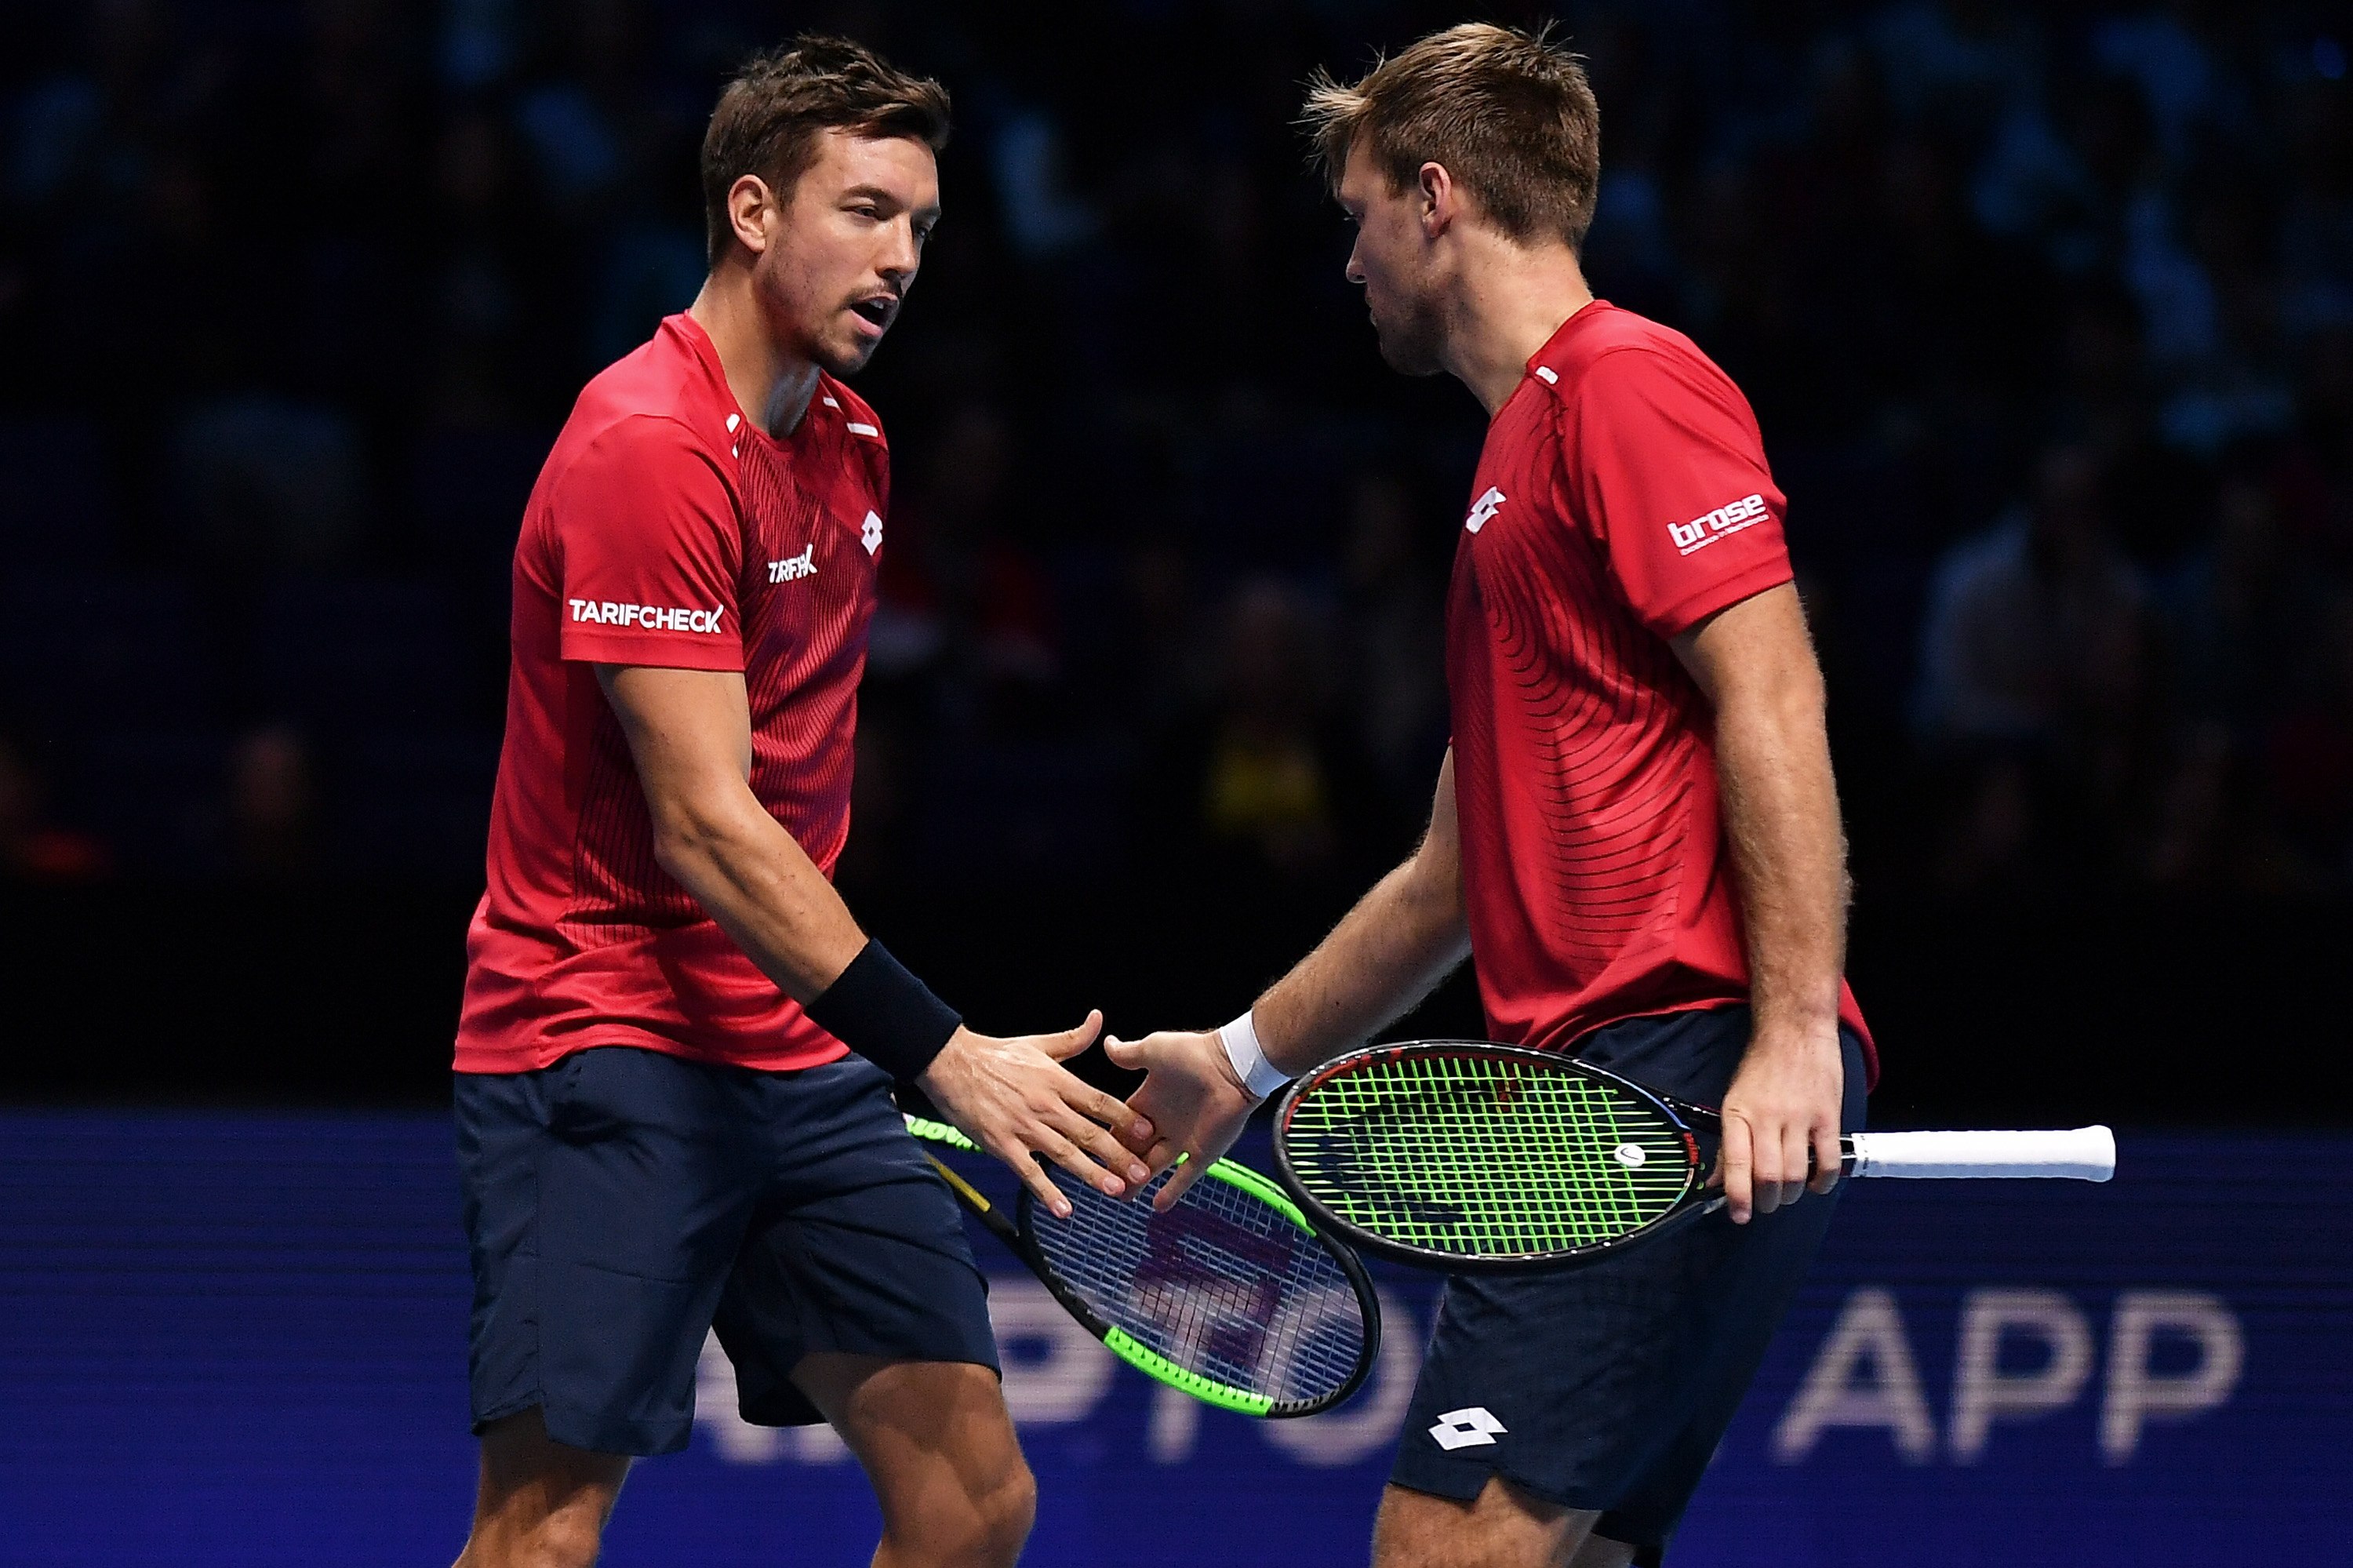 Doubles duo Krawietz and Mies out to keep dream season going in London